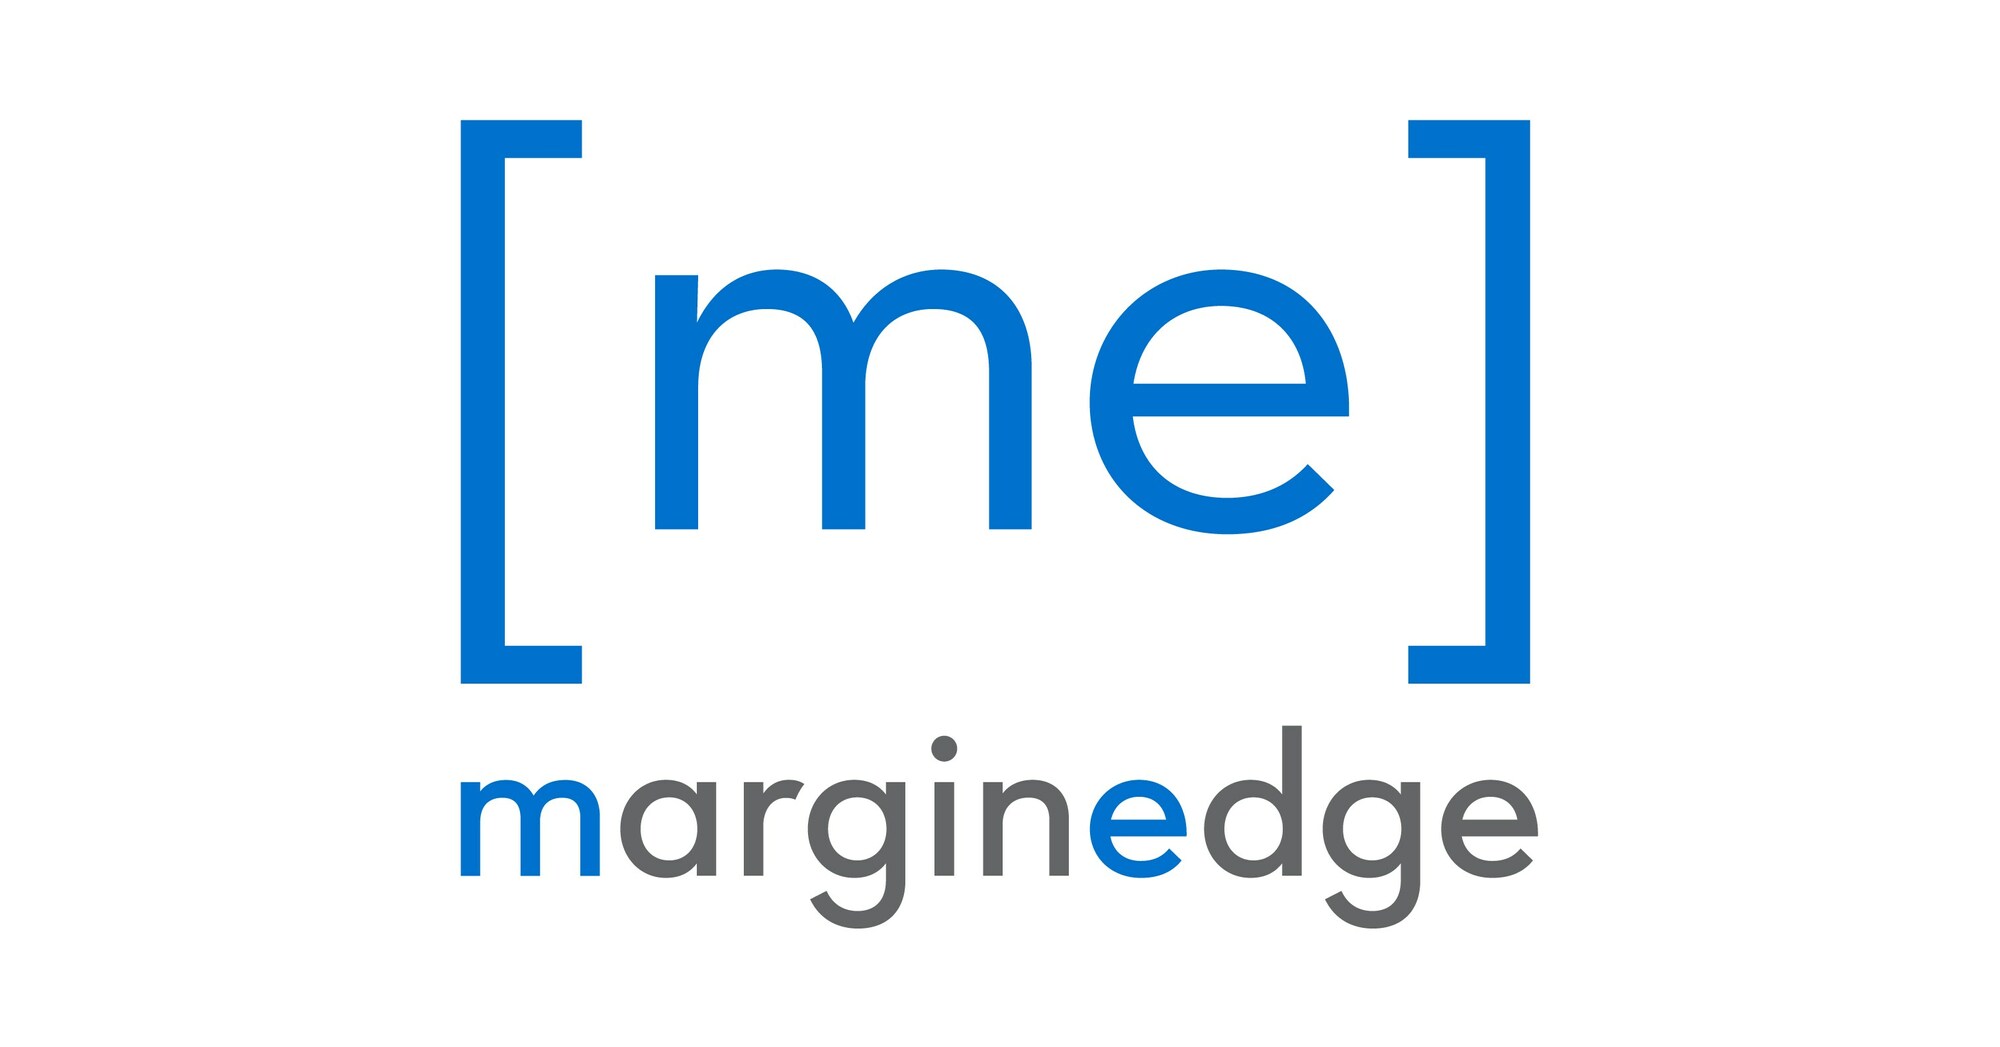 19-facts-about-marginedge